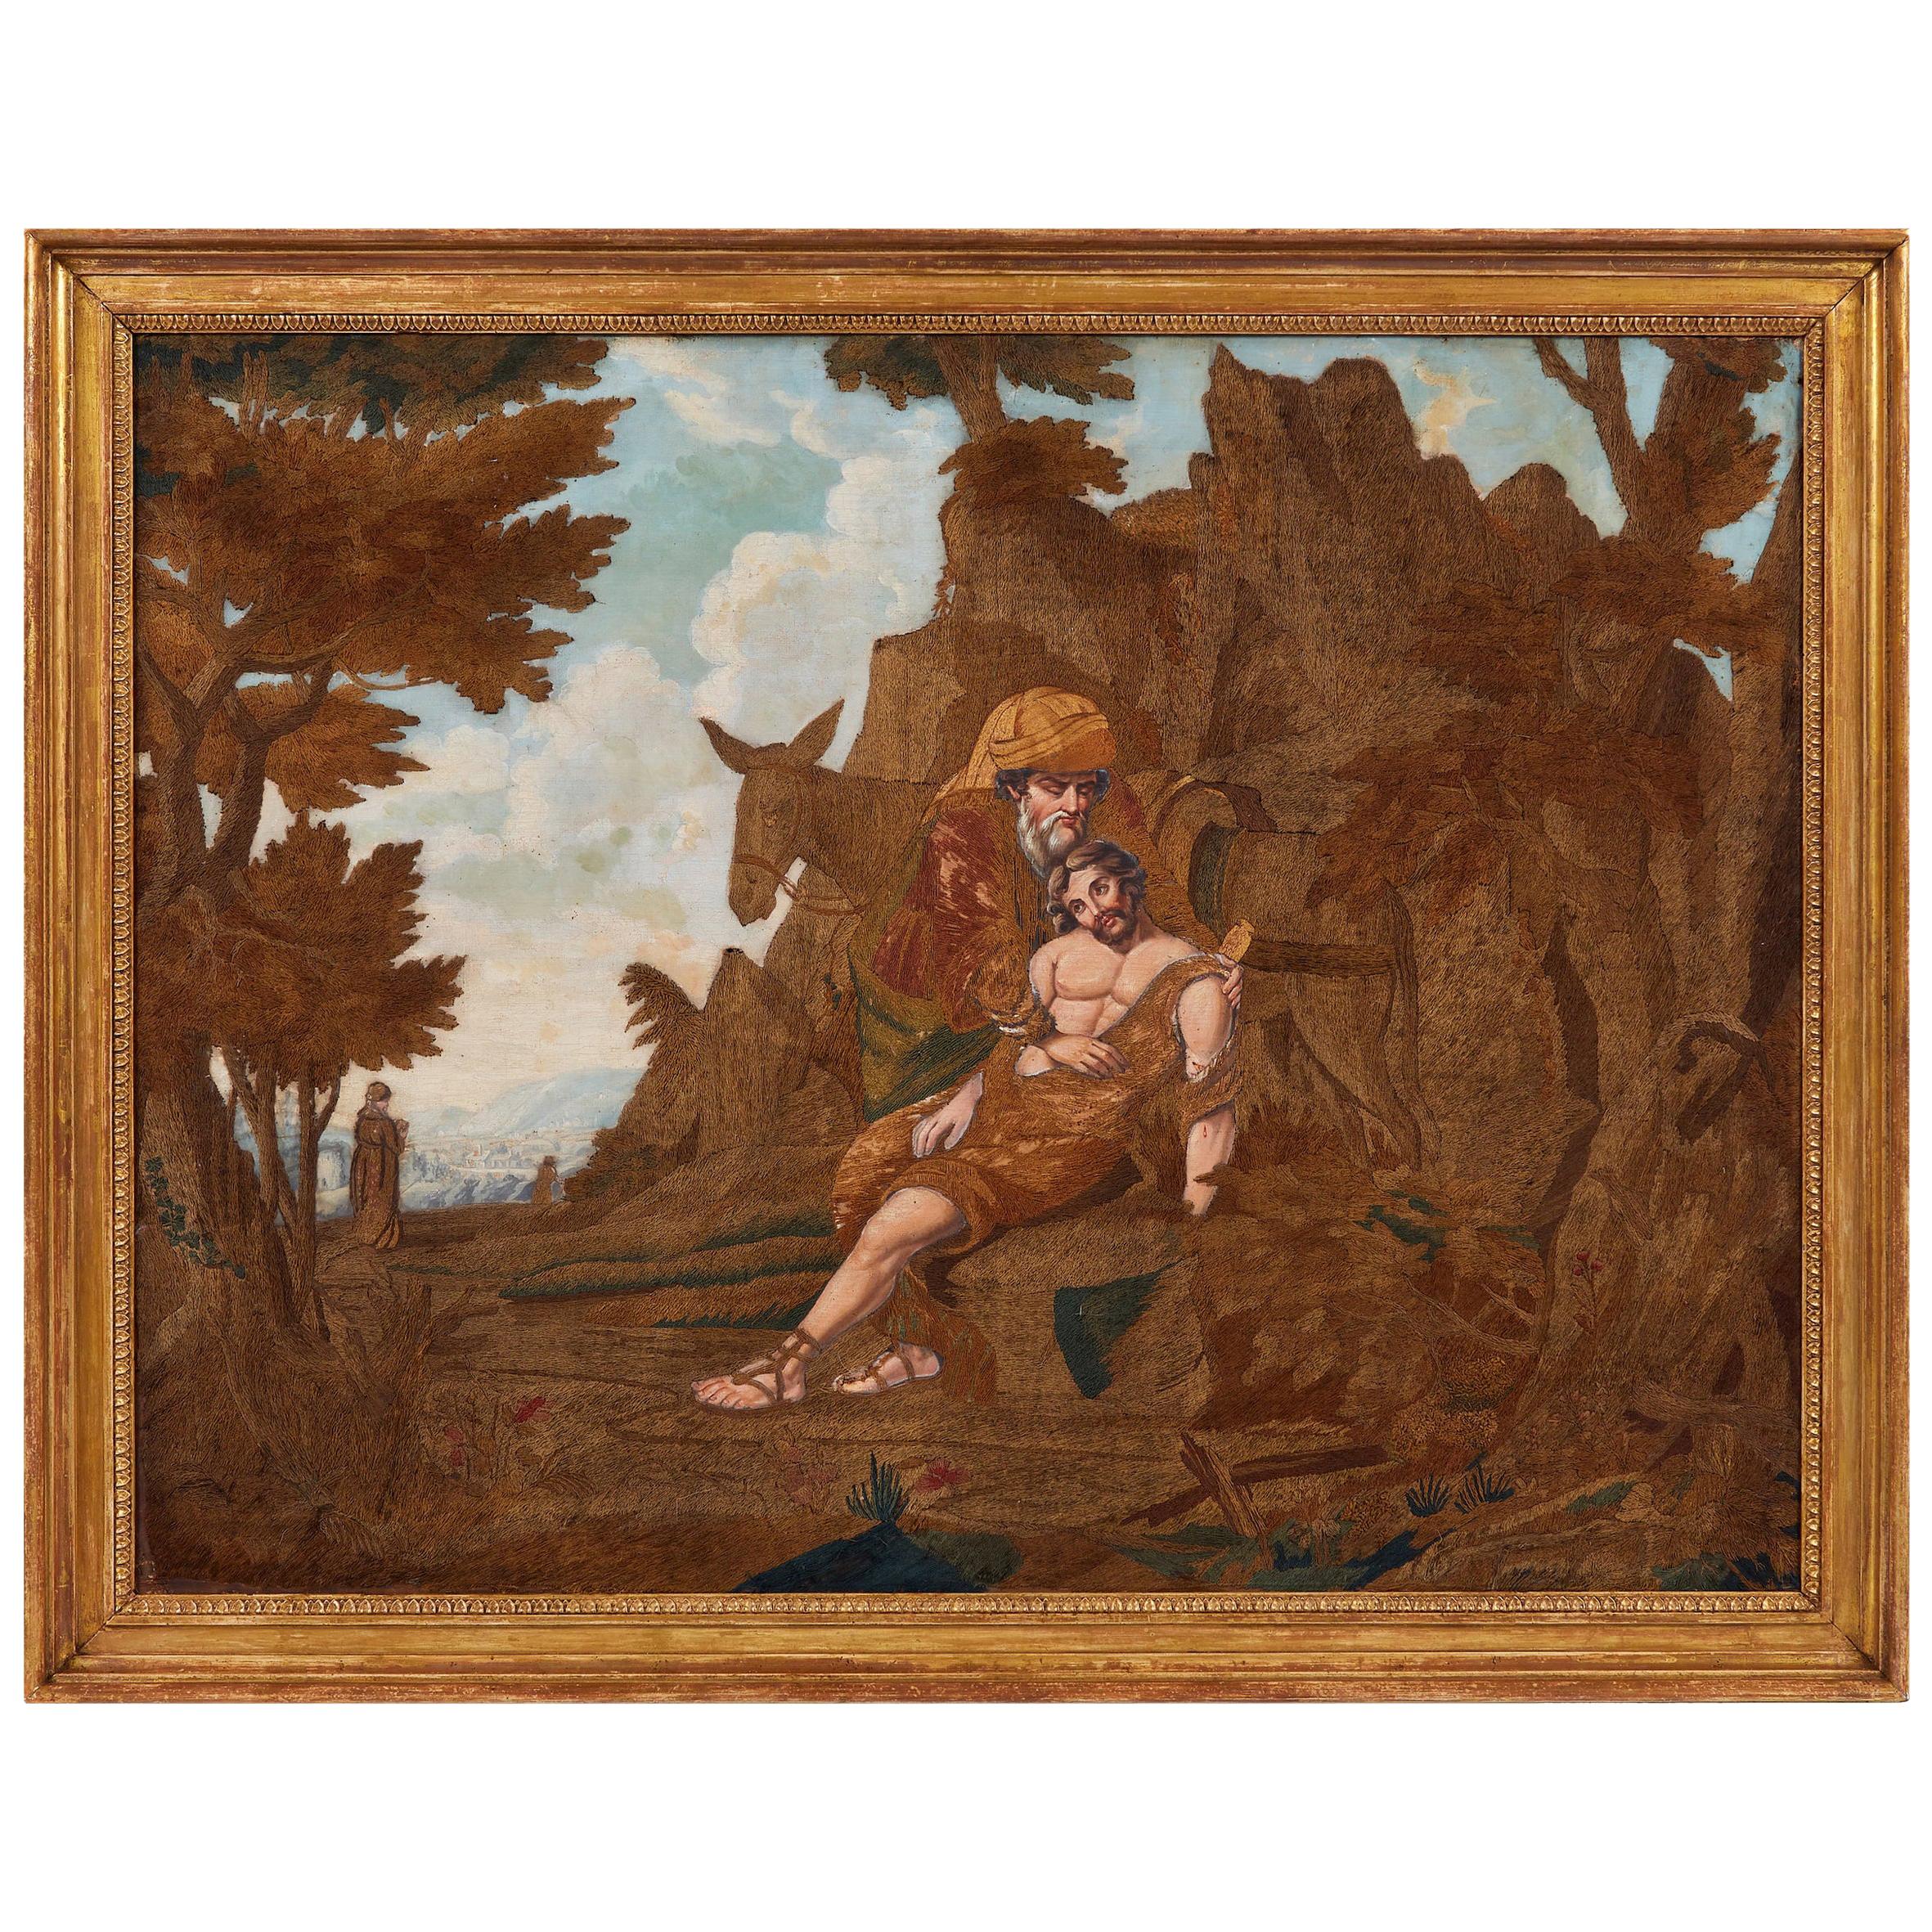 Large Early 19th Century Painted and Silkwork Picture 'The Good Samaritan'